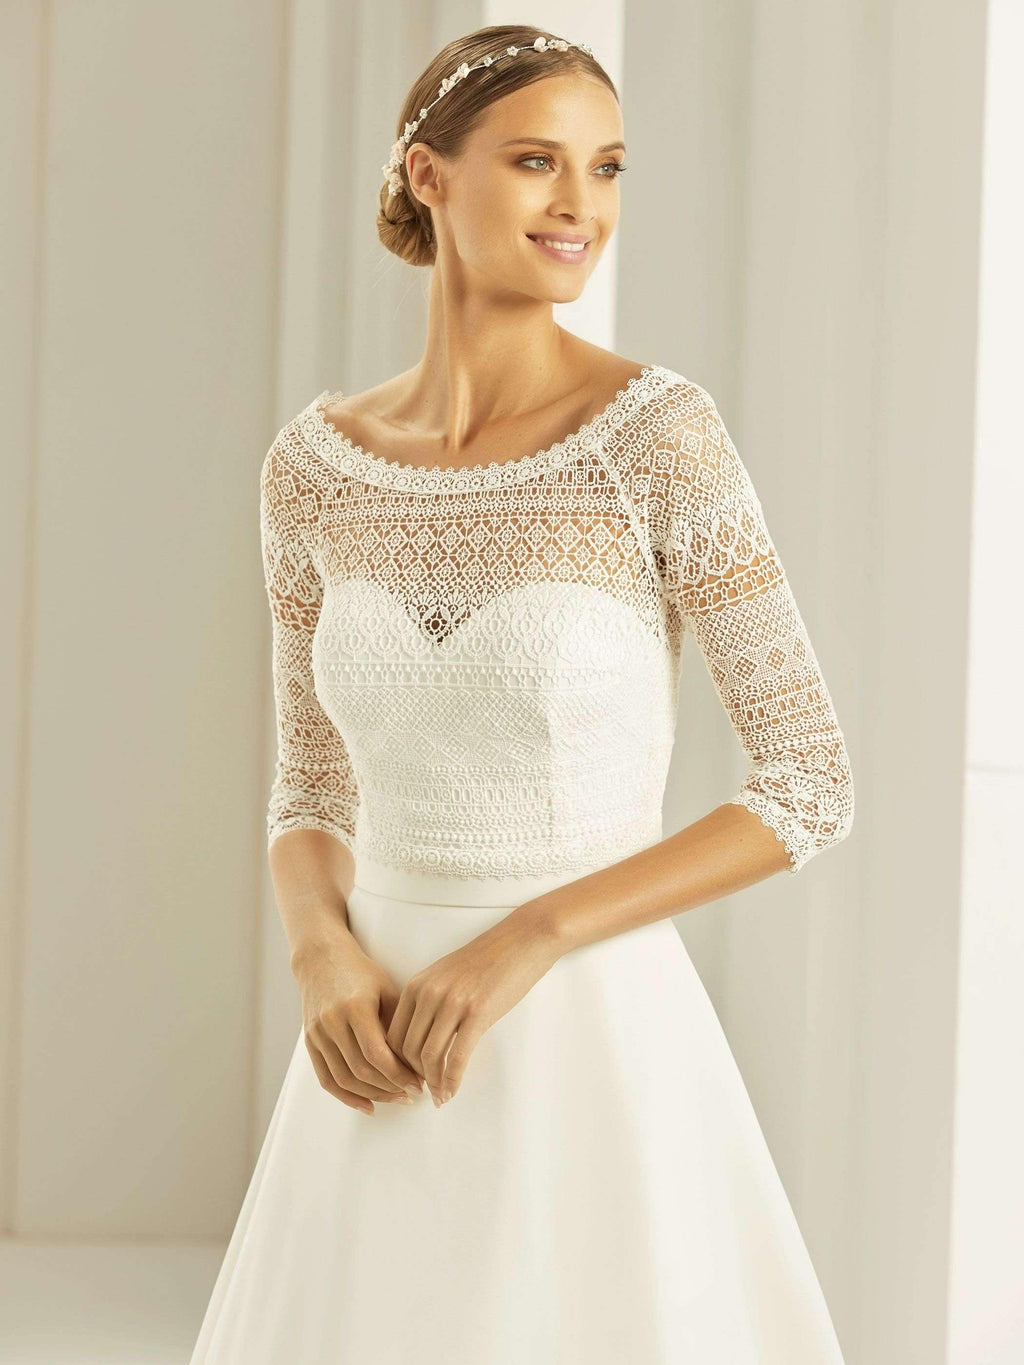 Elle Lace Jacket - Adore Bridal and Occasion Wear